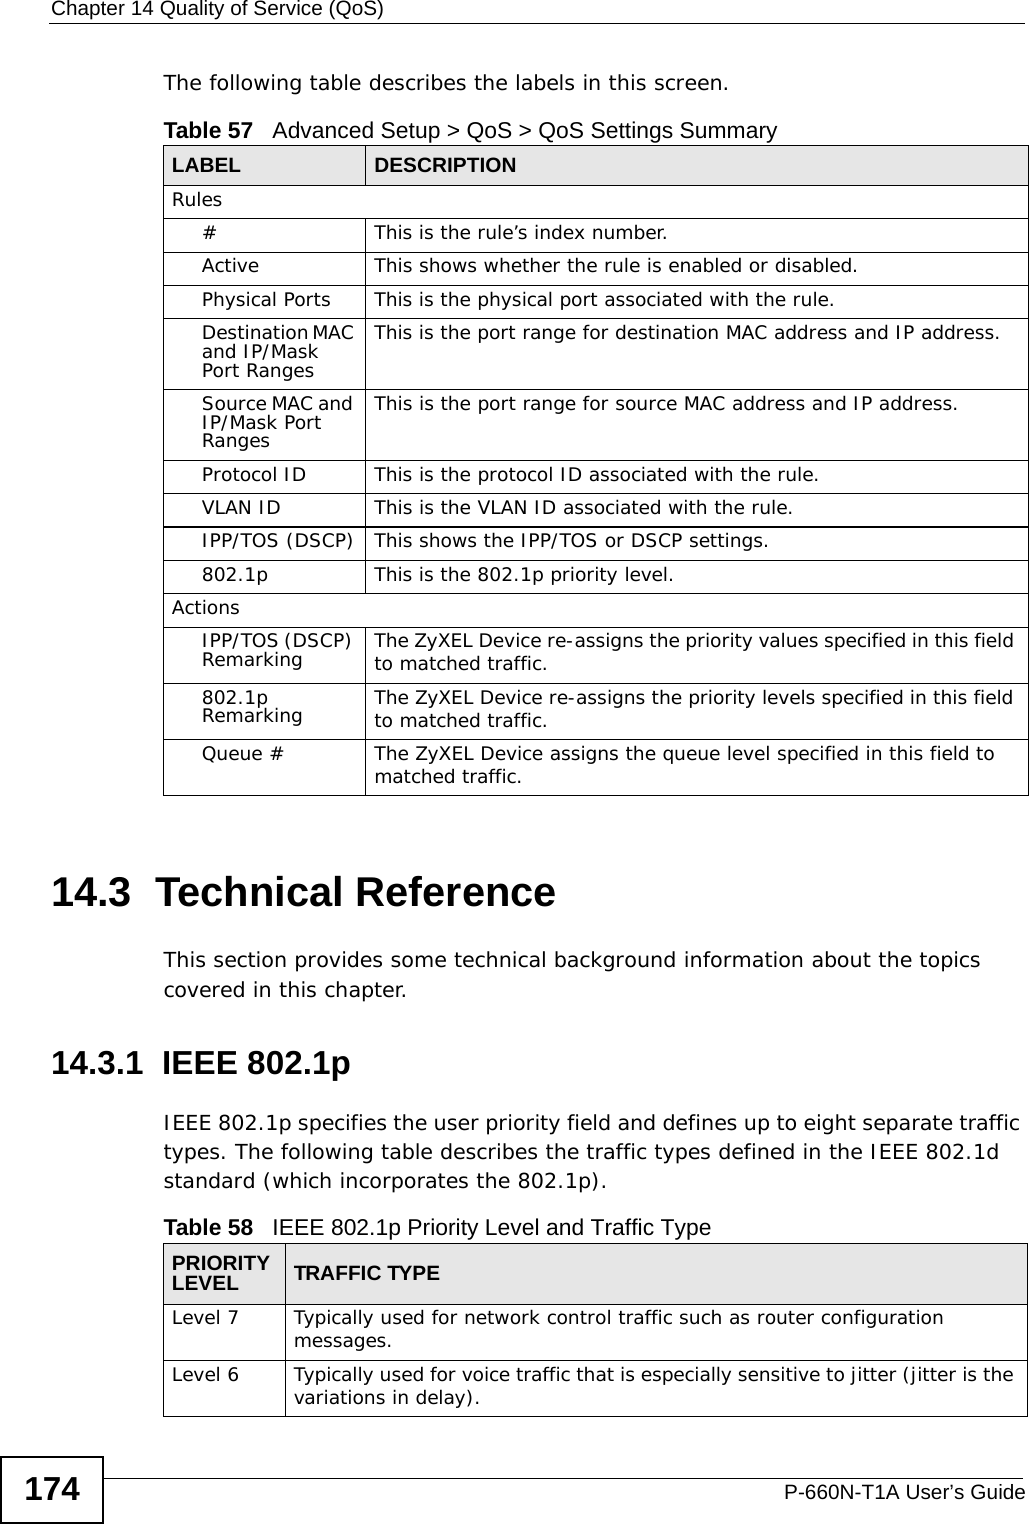 Chapter 14 Quality of Service (QoS)P-660N-T1A User’s Guide174The following table describes the labels in this screen.  14.3  Technical ReferenceThis section provides some technical background information about the topics covered in this chapter.14.3.1  IEEE 802.1pIEEE 802.1p specifies the user priority field and defines up to eight separate traffic types. The following table describes the traffic types defined in the IEEE 802.1d standard (which incorporates the 802.1p). Table 57   Advanced Setup &gt; QoS &gt; QoS Settings SummaryLABEL DESCRIPTIONRules#This is the rule’s index number.Active This shows whether the rule is enabled or disabled.Physical Ports This is the physical port associated with the rule.Destination MAC and IP/Mask Port RangesThis is the port range for destination MAC address and IP address.Source MAC and IP/Mask Port RangesThis is the port range for source MAC address and IP address.Protocol ID This is the protocol ID associated with the rule.VLAN ID This is the VLAN ID associated with the rule.IPP/TOS (DSCP) This shows the IPP/TOS or DSCP settings.802.1p This is the 802.1p priority level.ActionsIPP/TOS (DSCP) Remarking The ZyXEL Device re-assigns the priority values specified in this field to matched traffic.802.1p Remarking The ZyXEL Device re-assigns the priority levels specified in this field to matched traffic.Queue # The ZyXEL Device assigns the queue level specified in this field to matched traffic.Table 58   IEEE 802.1p Priority Level and Traffic TypePRIORITY LEVEL TRAFFIC TYPELevel 7 Typically used for network control traffic such as router configuration messages.Level 6 Typically used for voice traffic that is especially sensitive to jitter (jitter is the variations in delay).